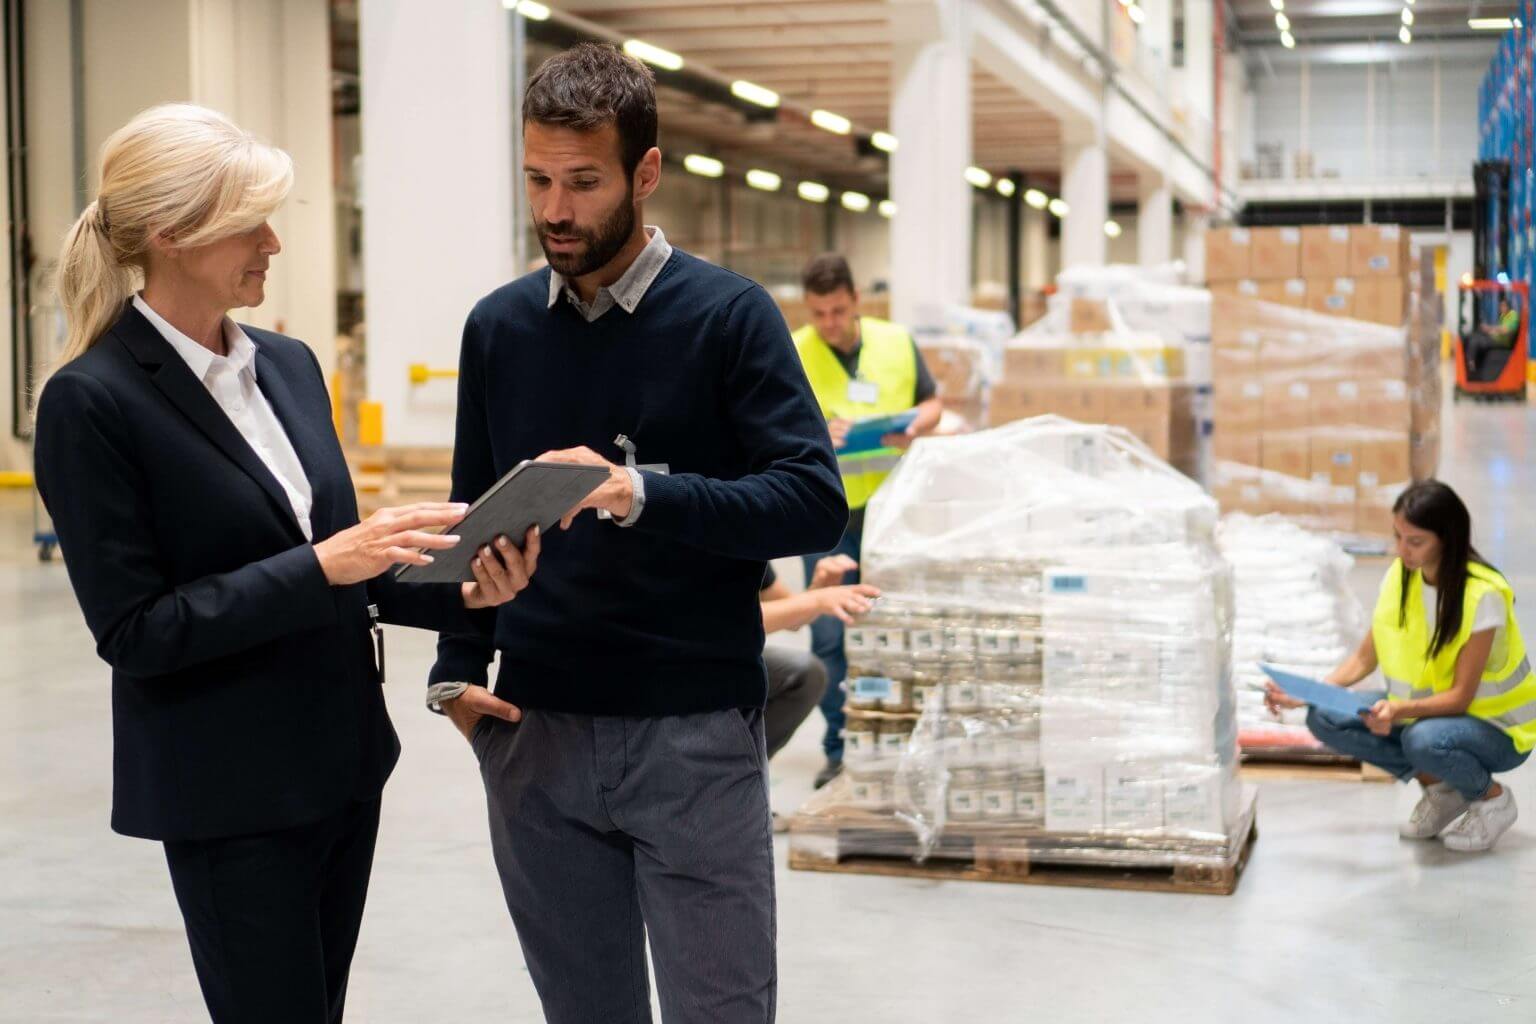 5 Signs It’s Time to Modernize Your Supply Chain Technology